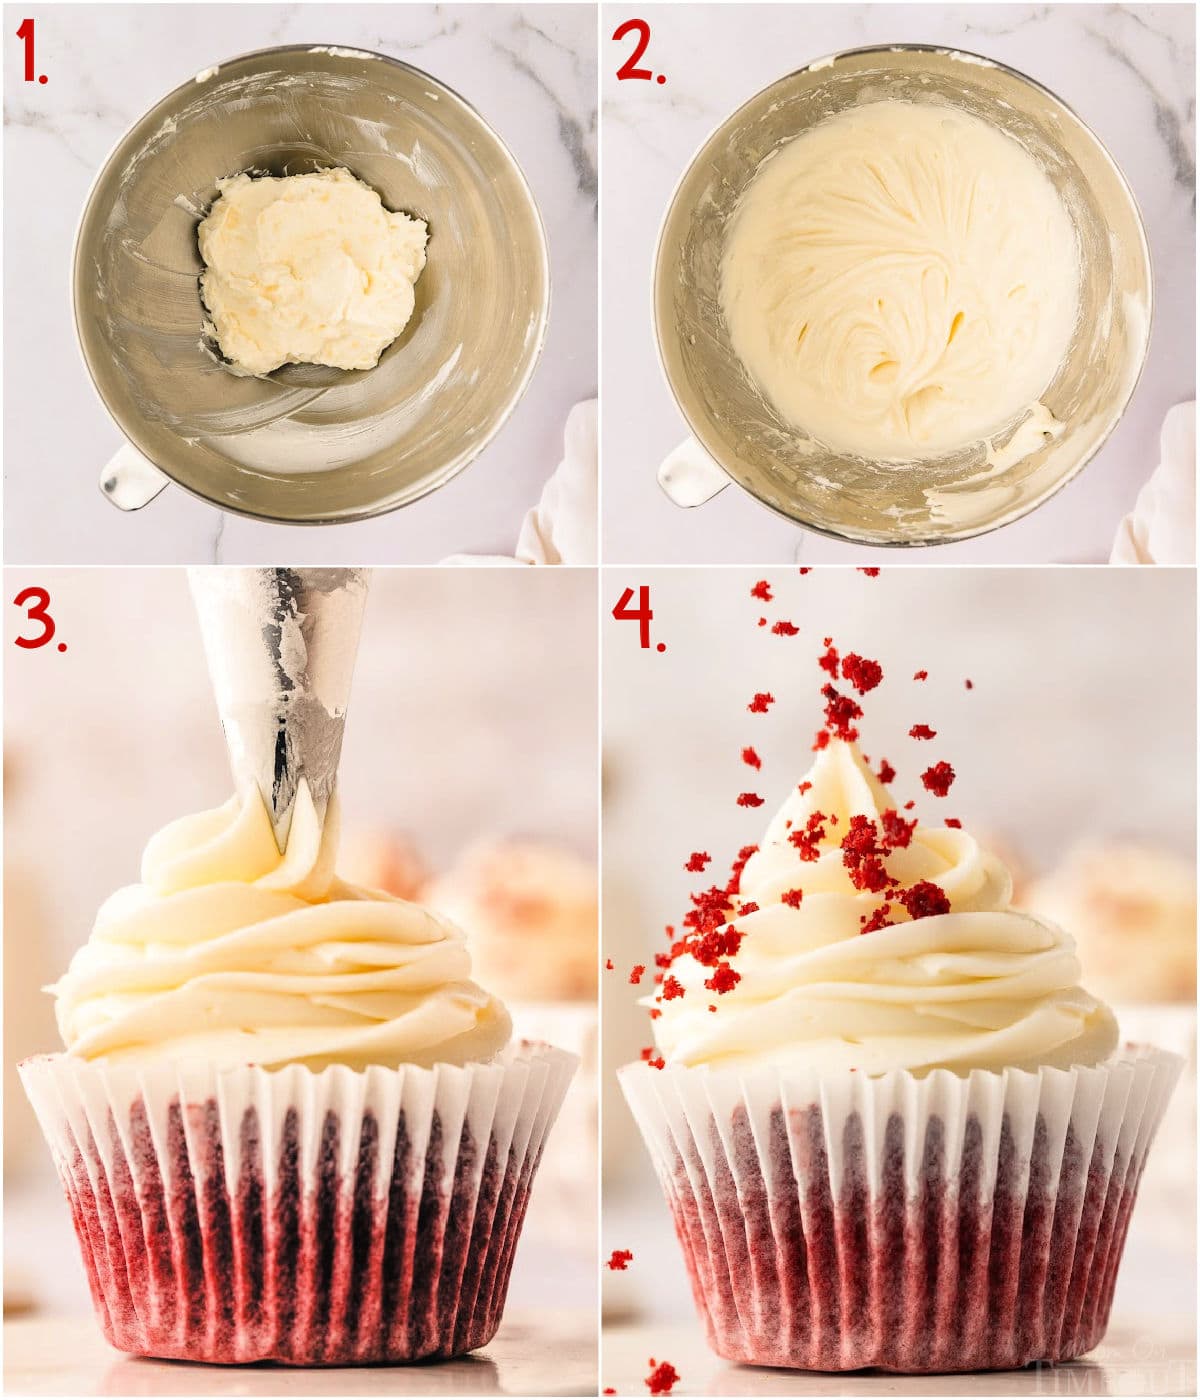 four image collage showing how to make cream cheese frosting and frost red velvet cupcakes with it.